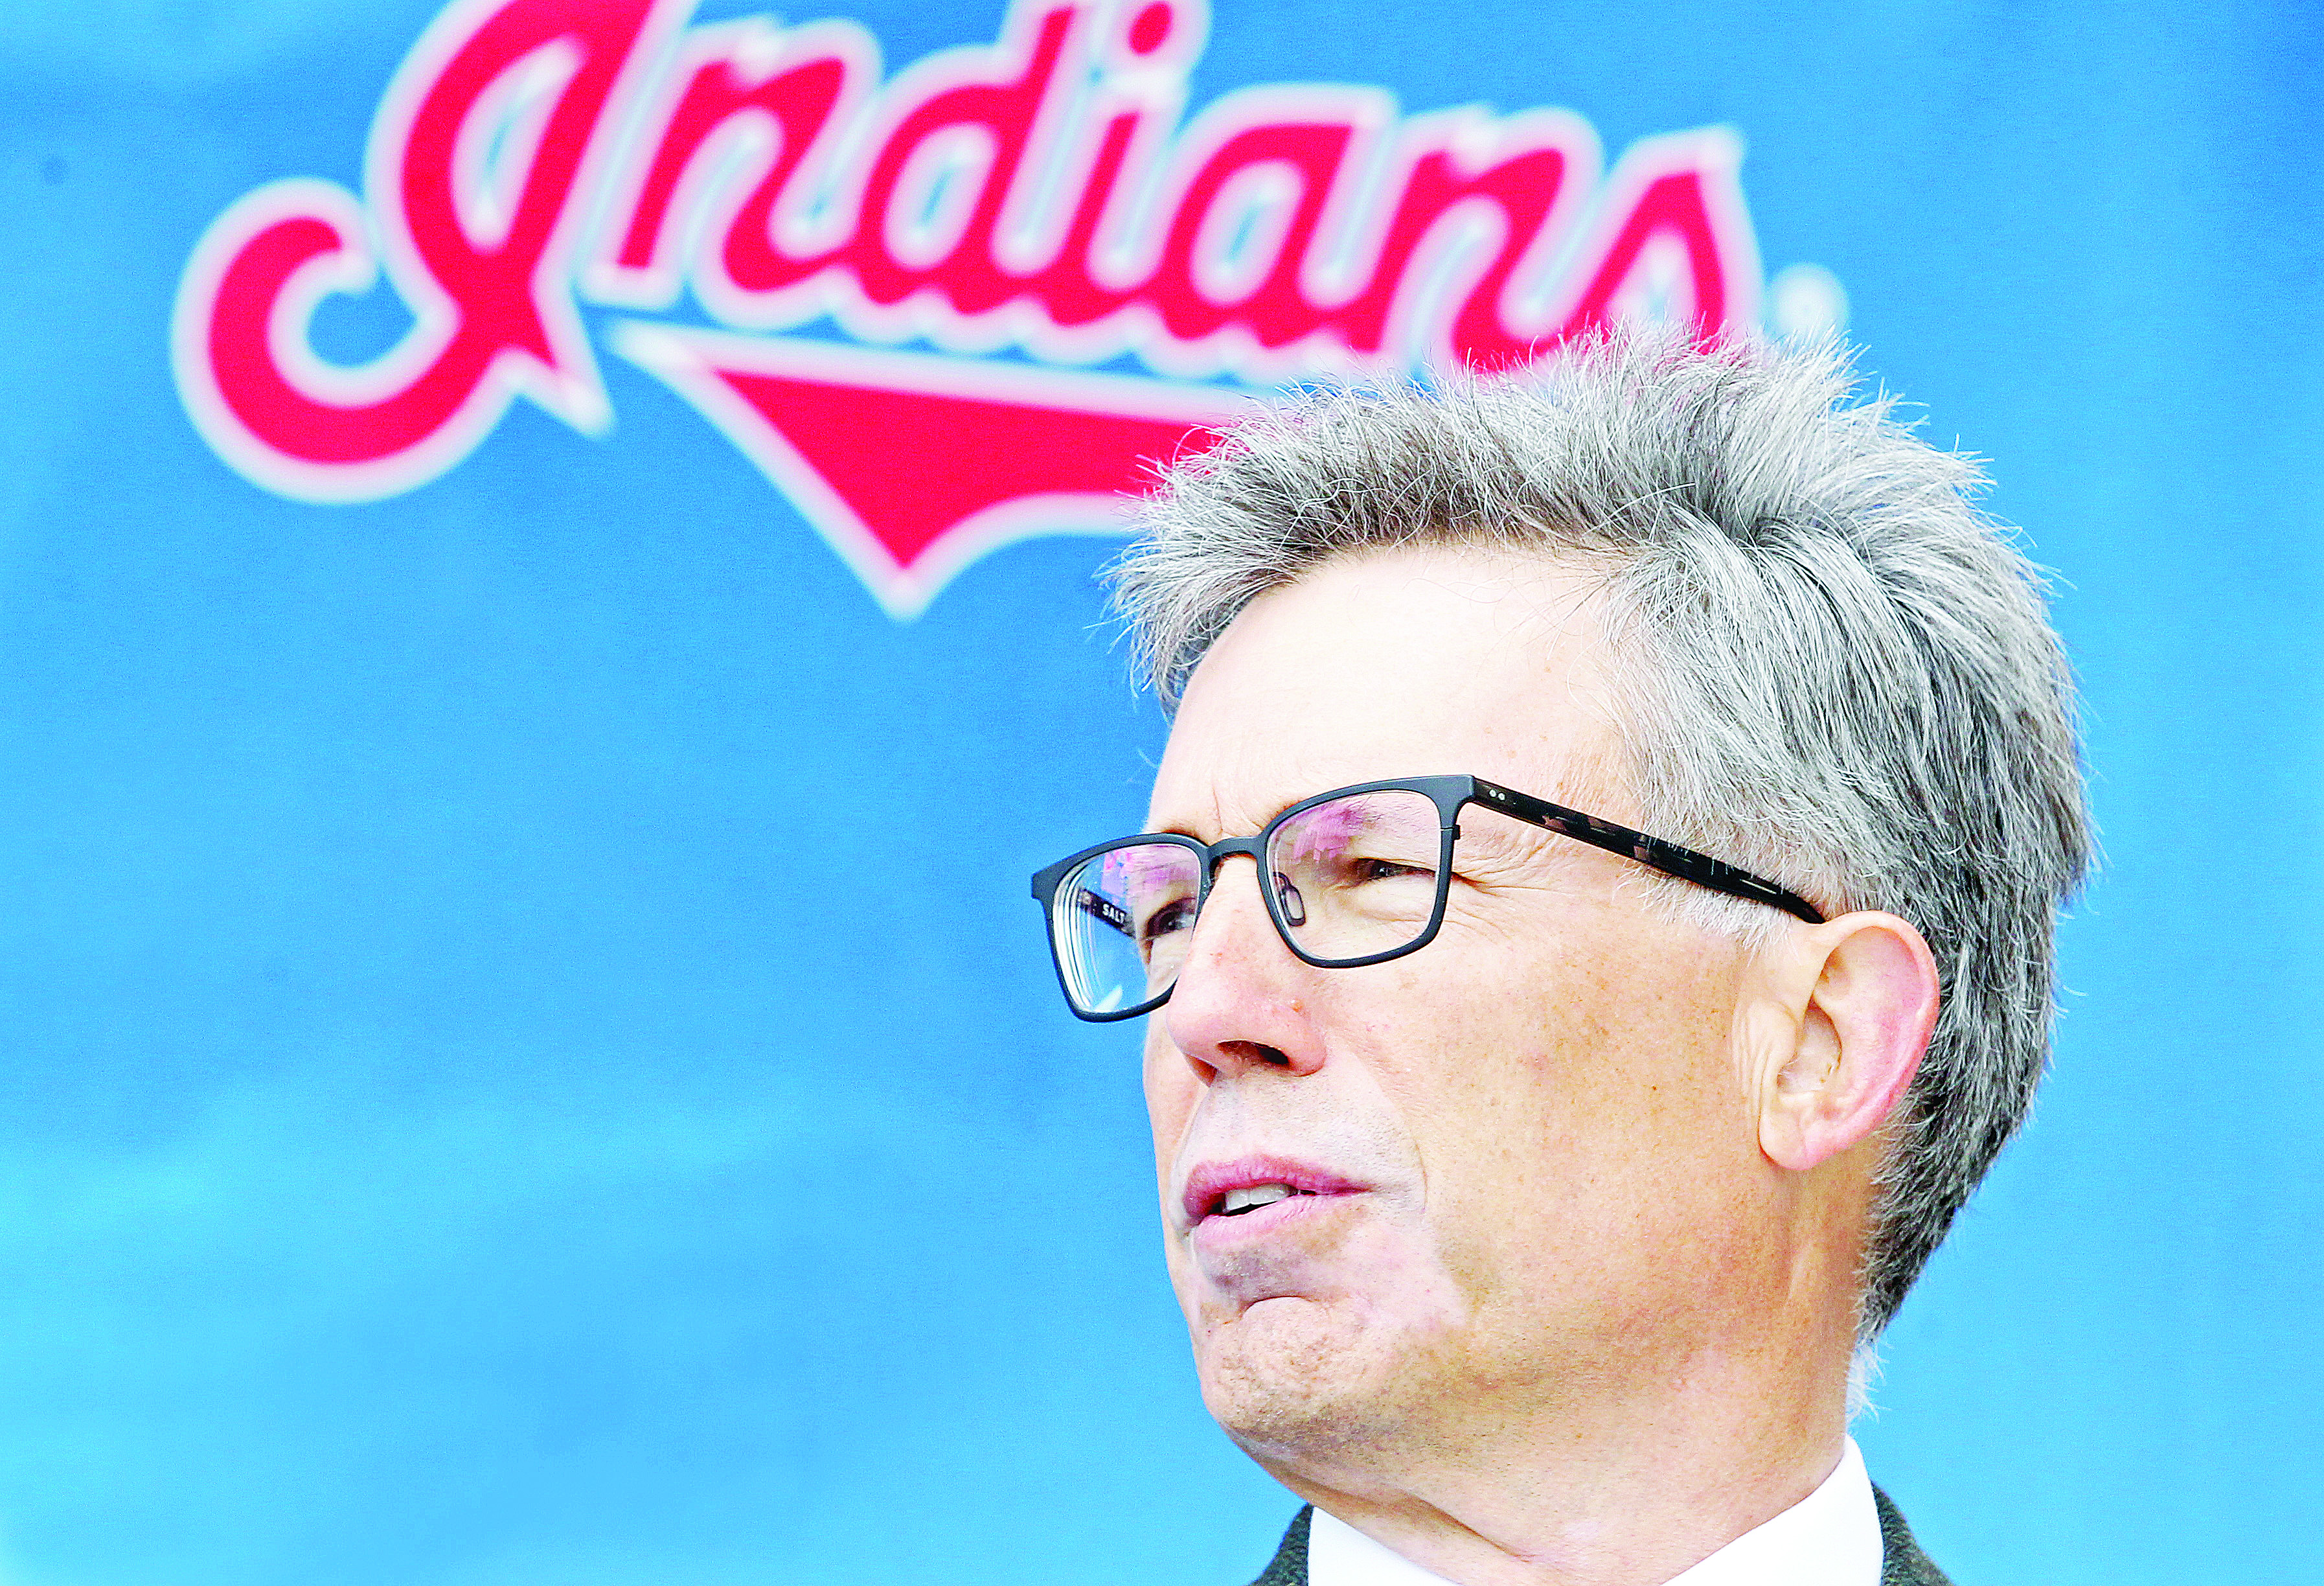 Why are the Cleveland Indians changing their name? Cleveland Colavitos?  Cleveland Buckeyes? – Hey, Terry! 